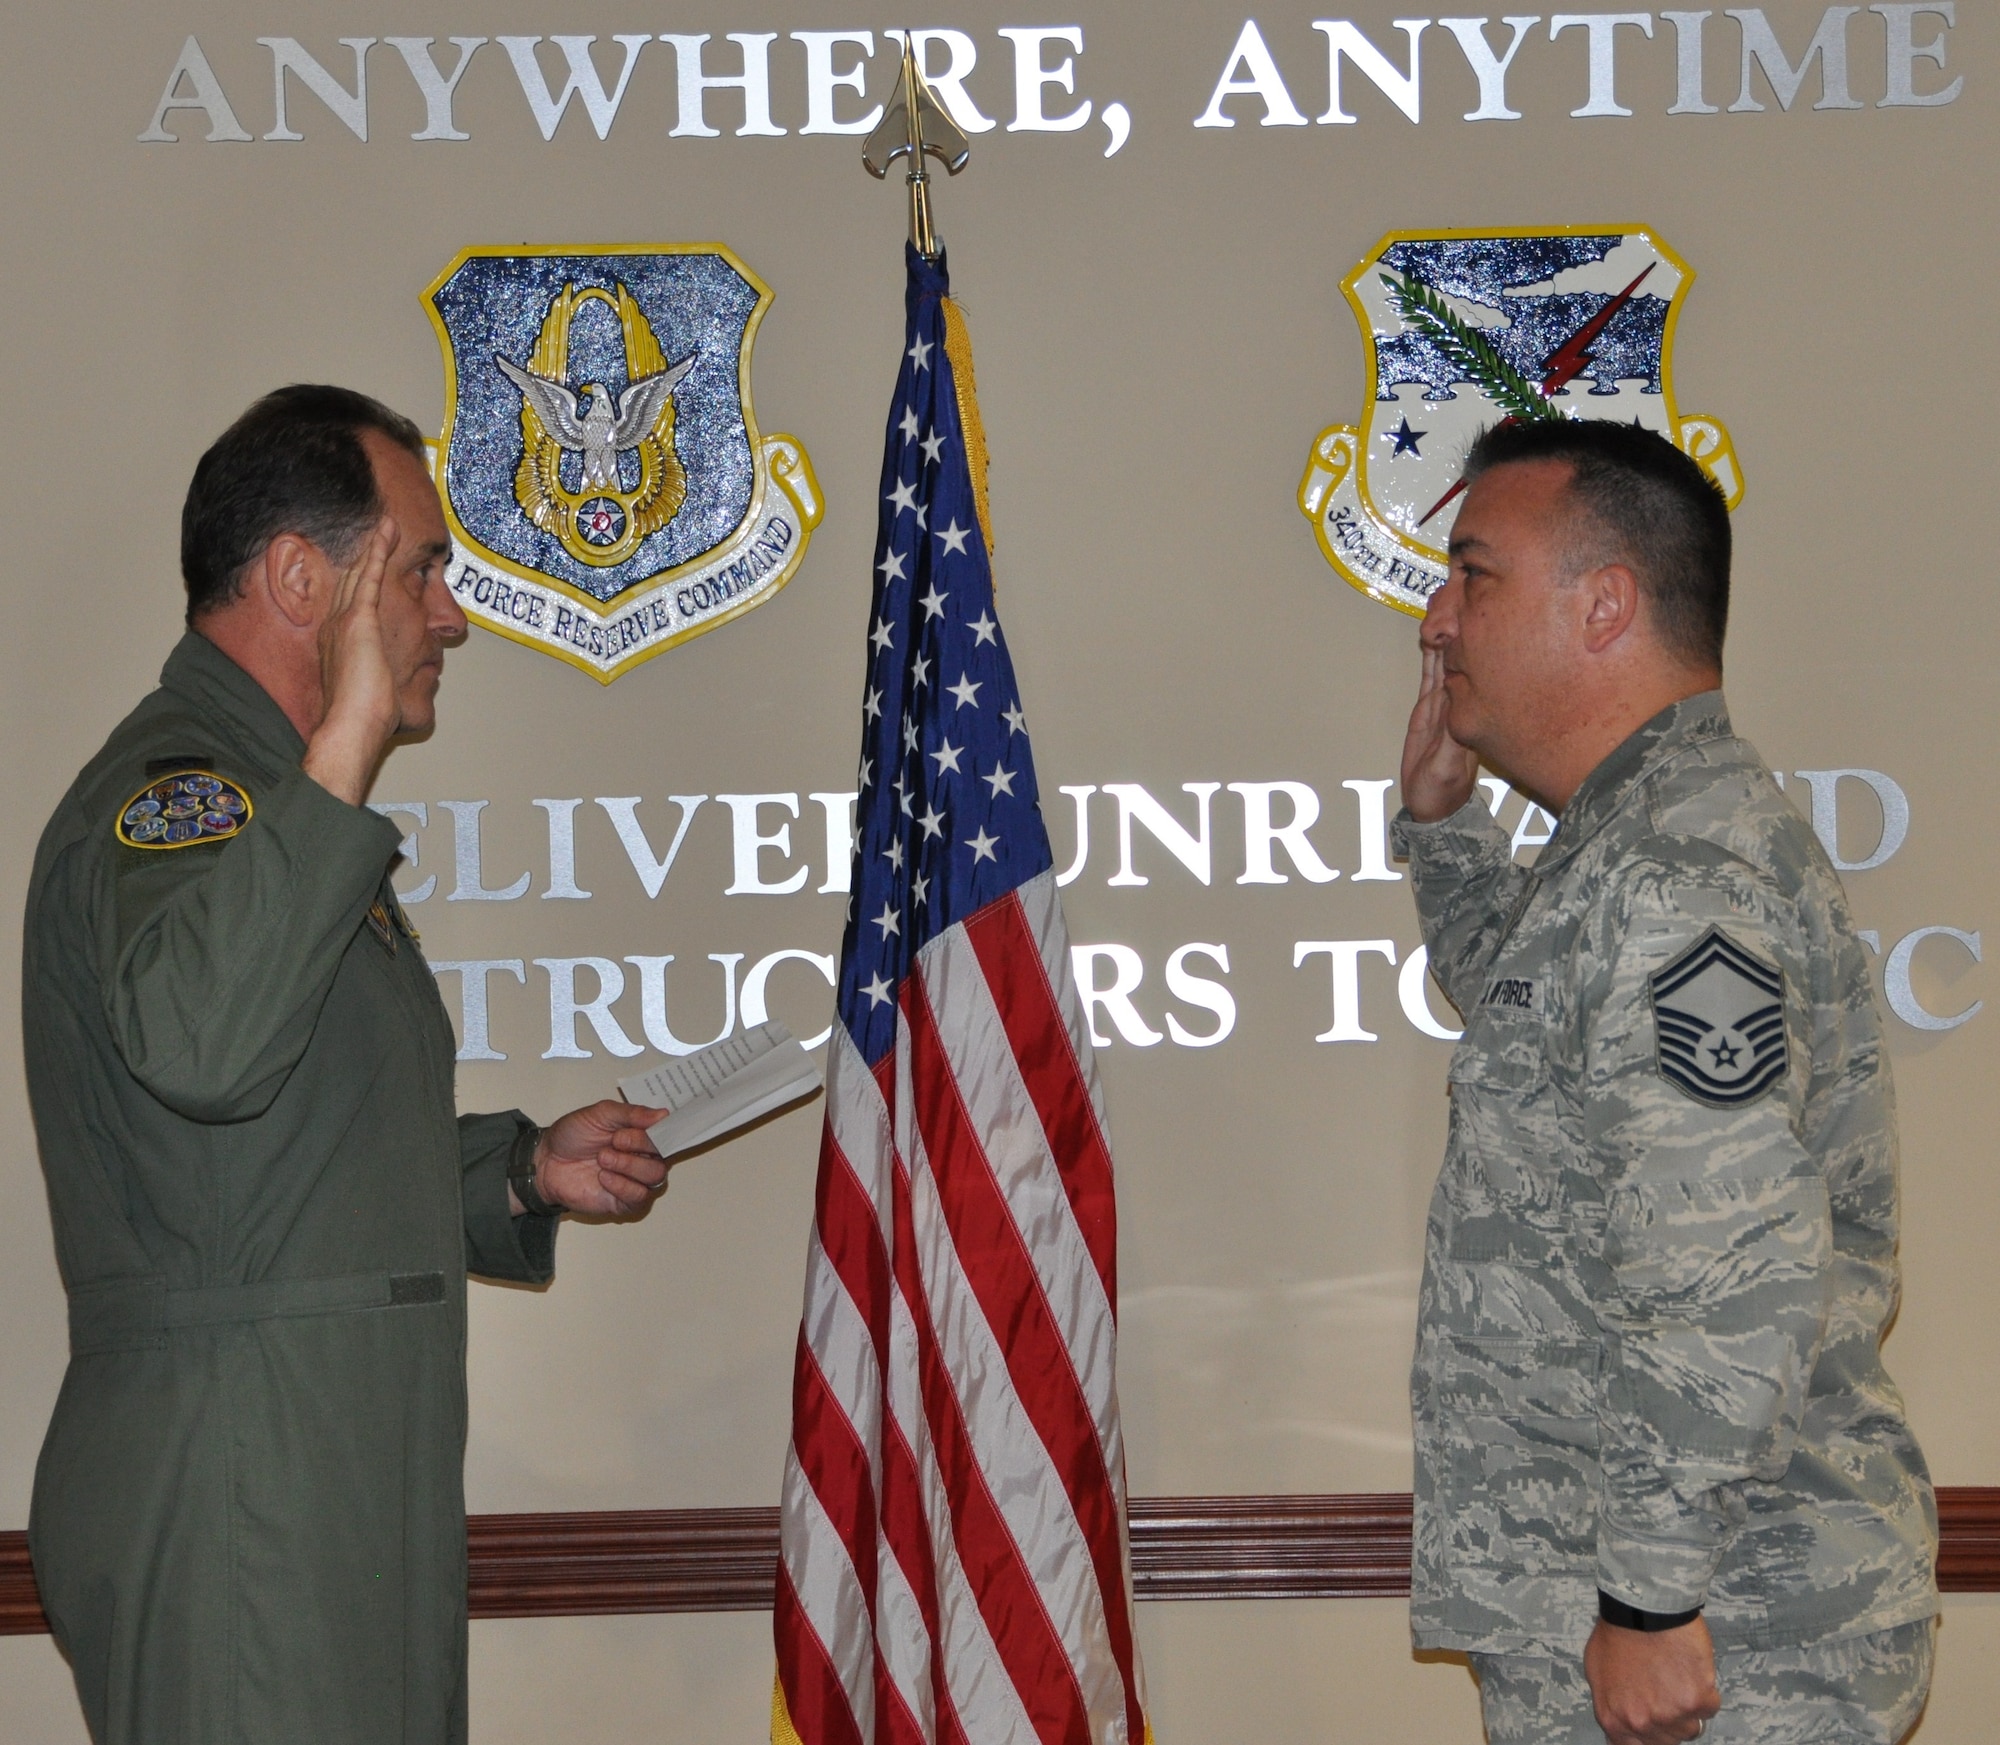 Senior Master Sgt. Jon Rousseaux receives his reenlistment oath from Col. Michael Vanzo, 340 FTG Director of Operations, Feb. 3, 2017. (Photo by Janis El Shabazz, 340 FTG Public Affairs).